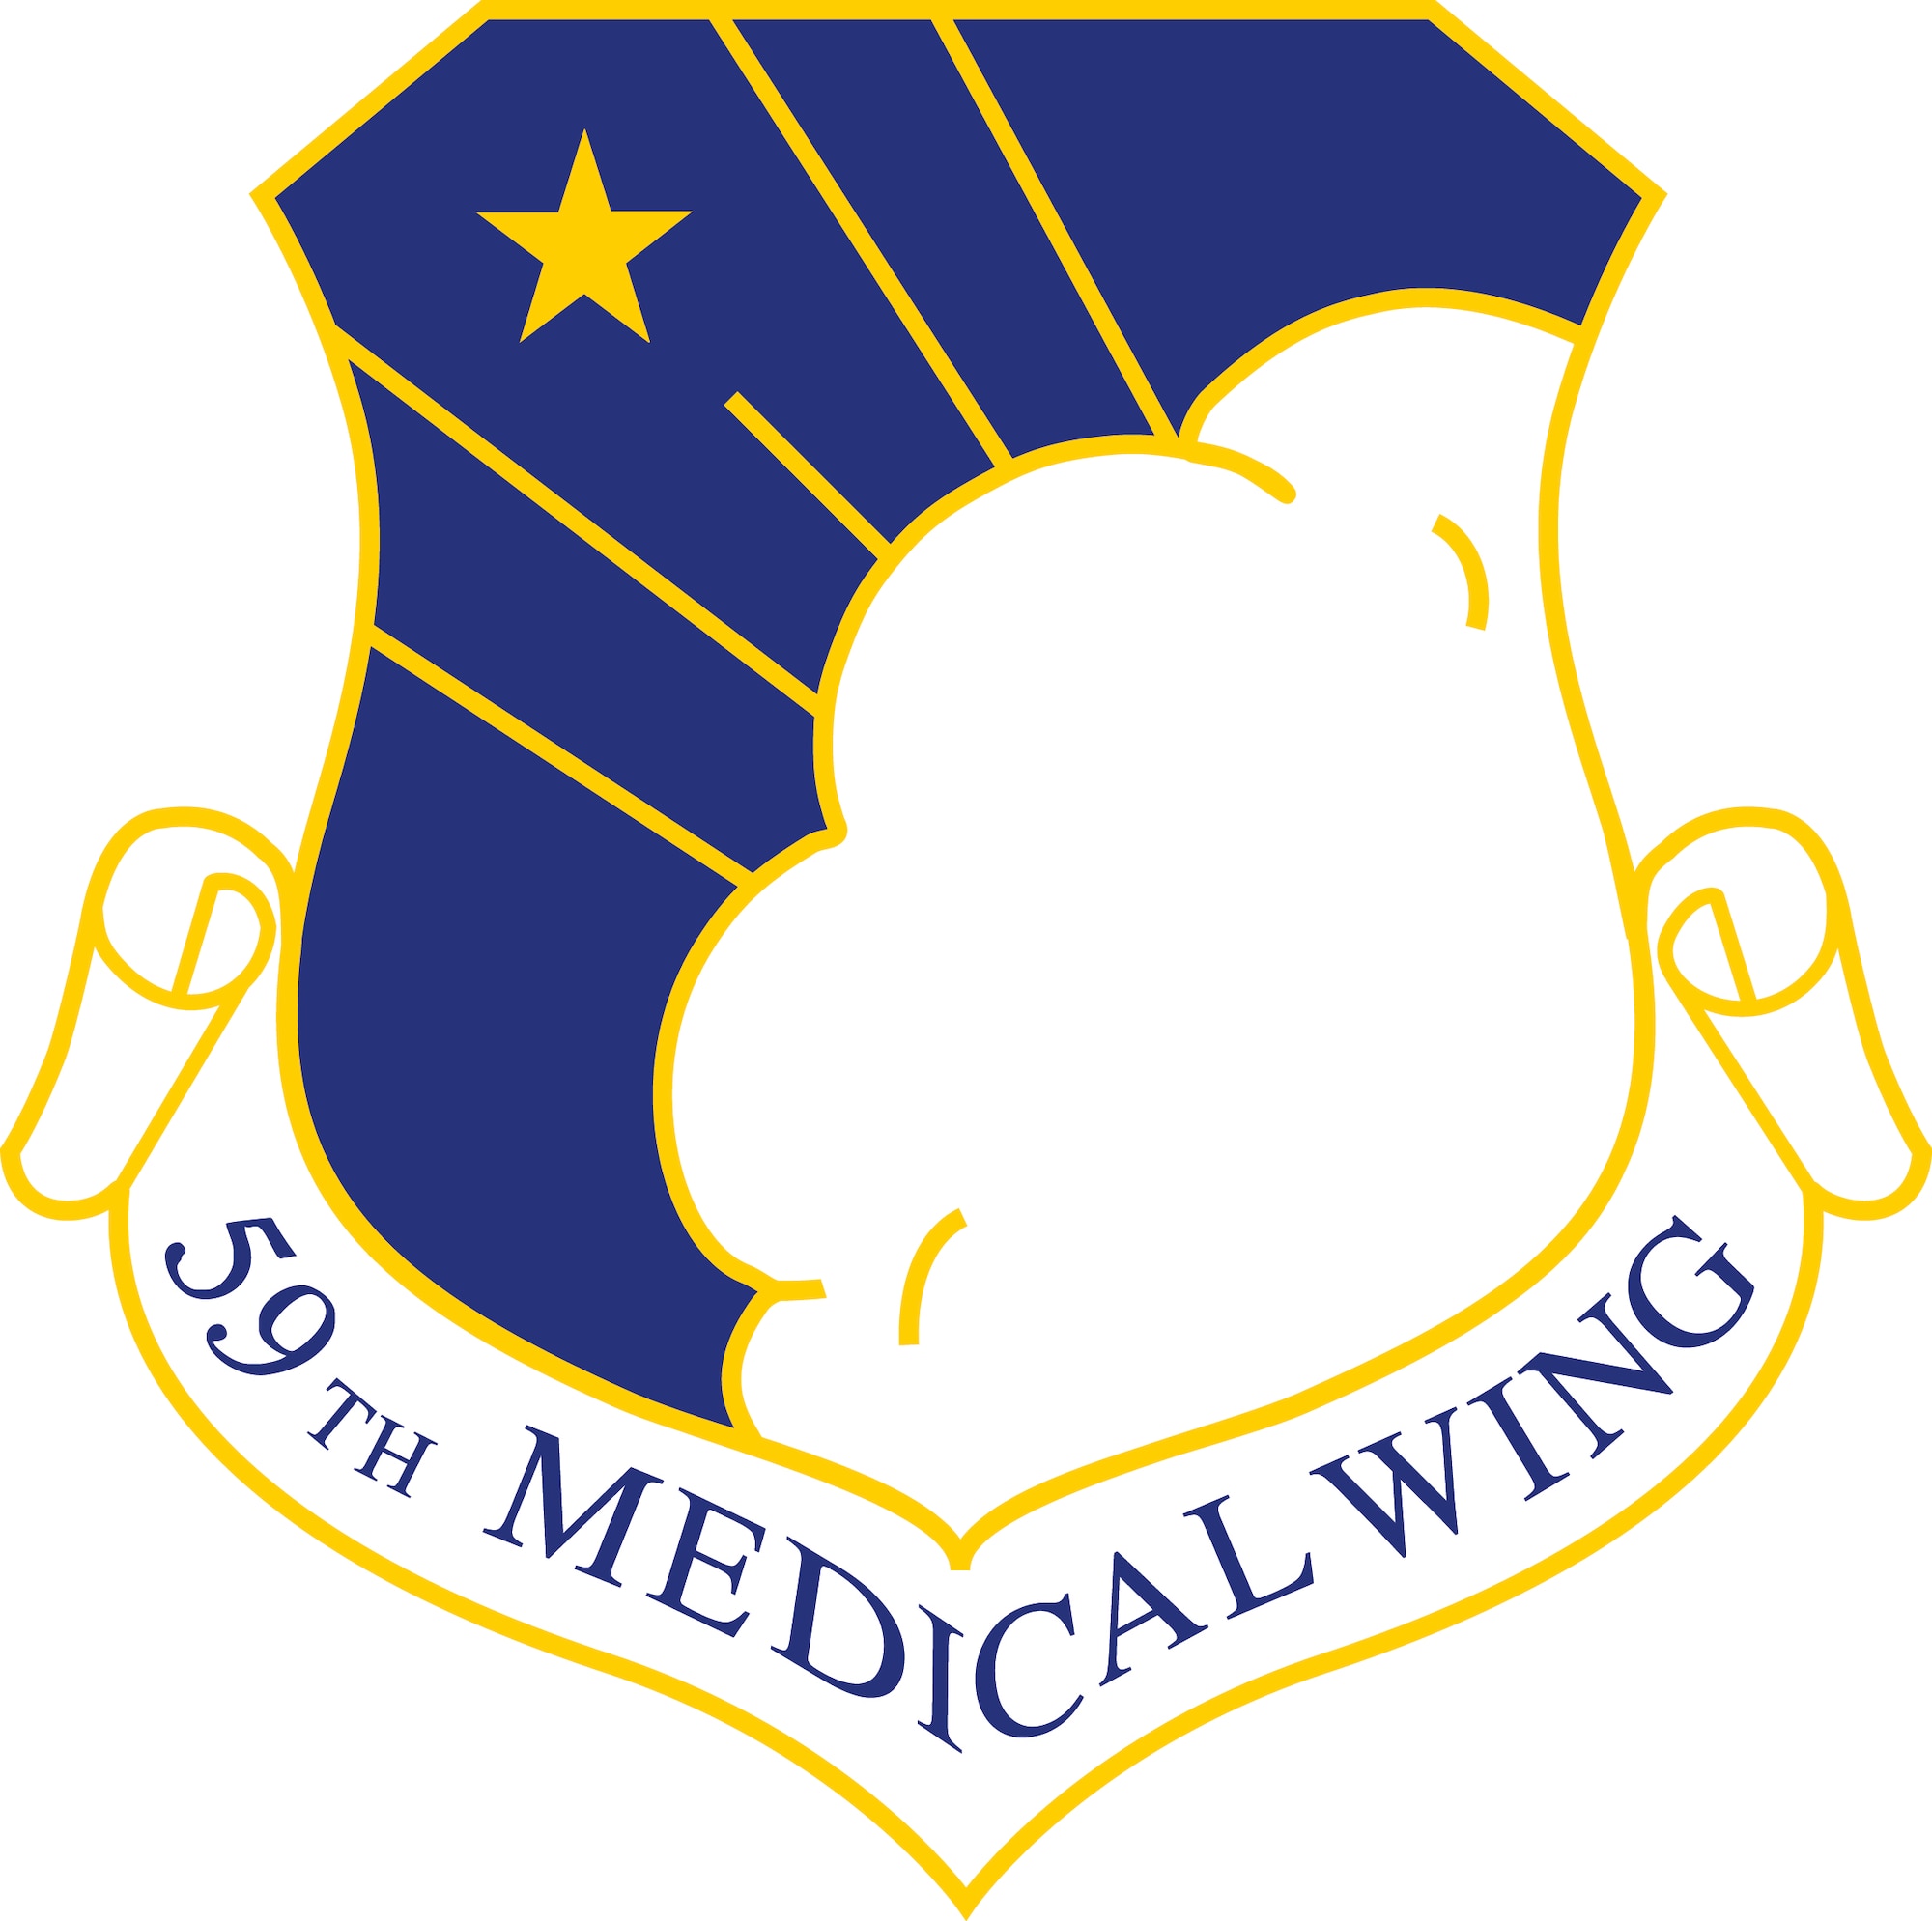 59th Medical Wing; JPG optimized for print. 